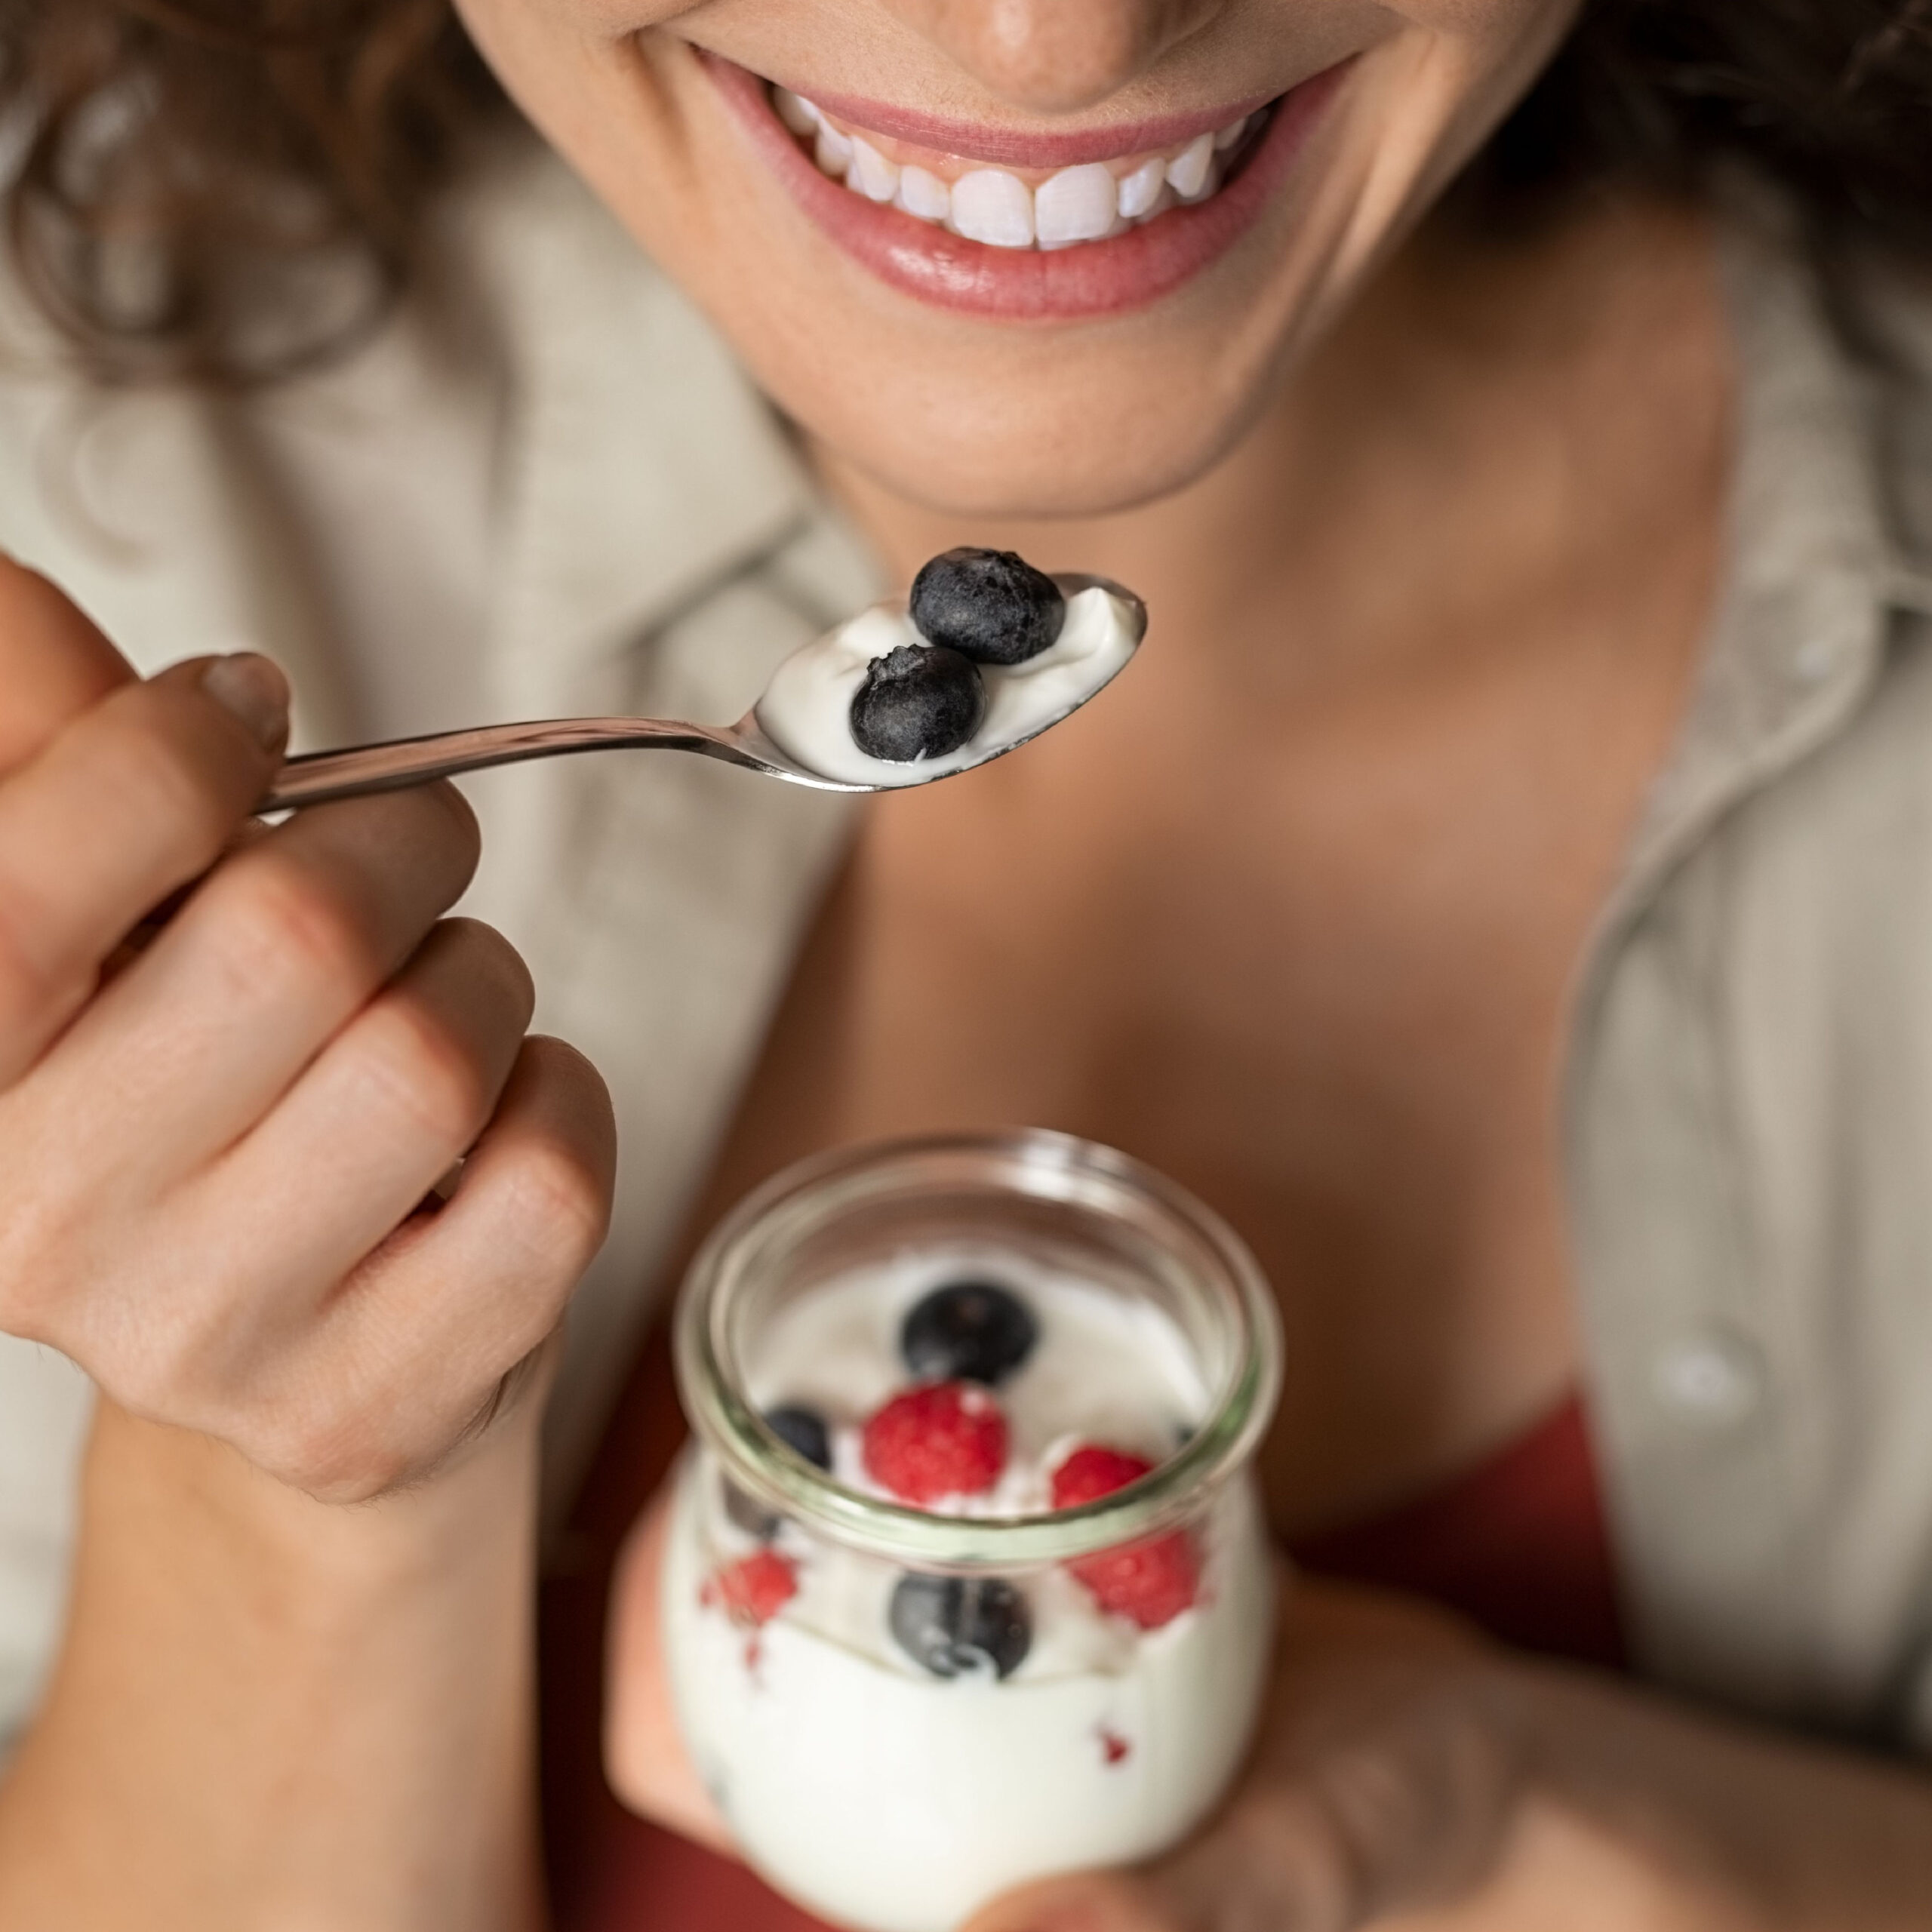 woman eating yogurt with berries and smiling